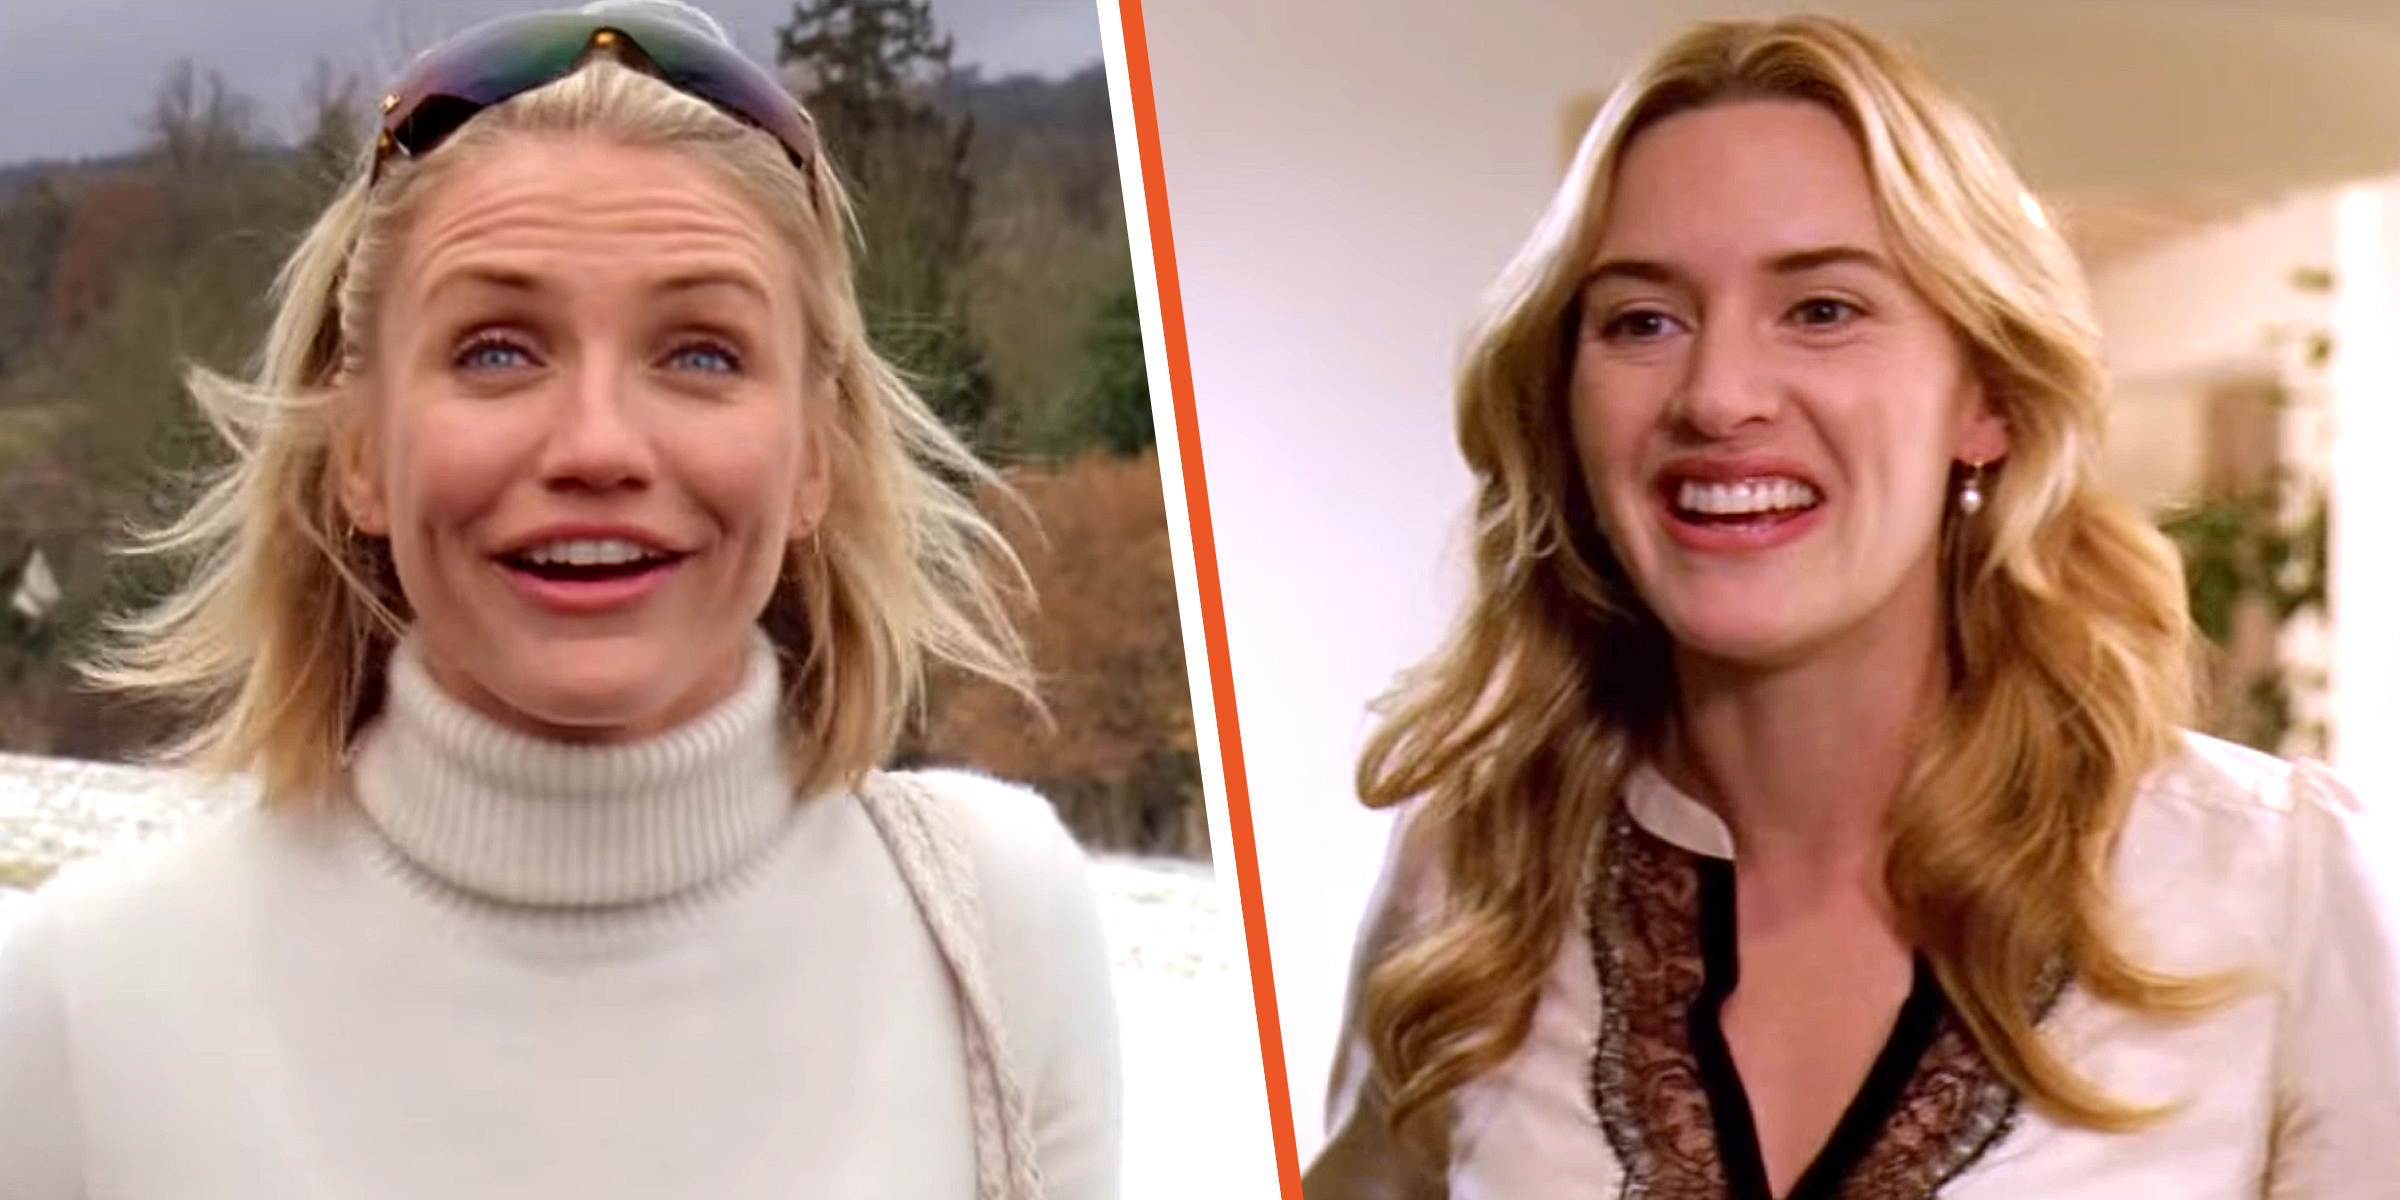 Actress Cameron Diaz | Actress Kate Winslet | Source: YouTube.com/Sony Pictures Entertainment